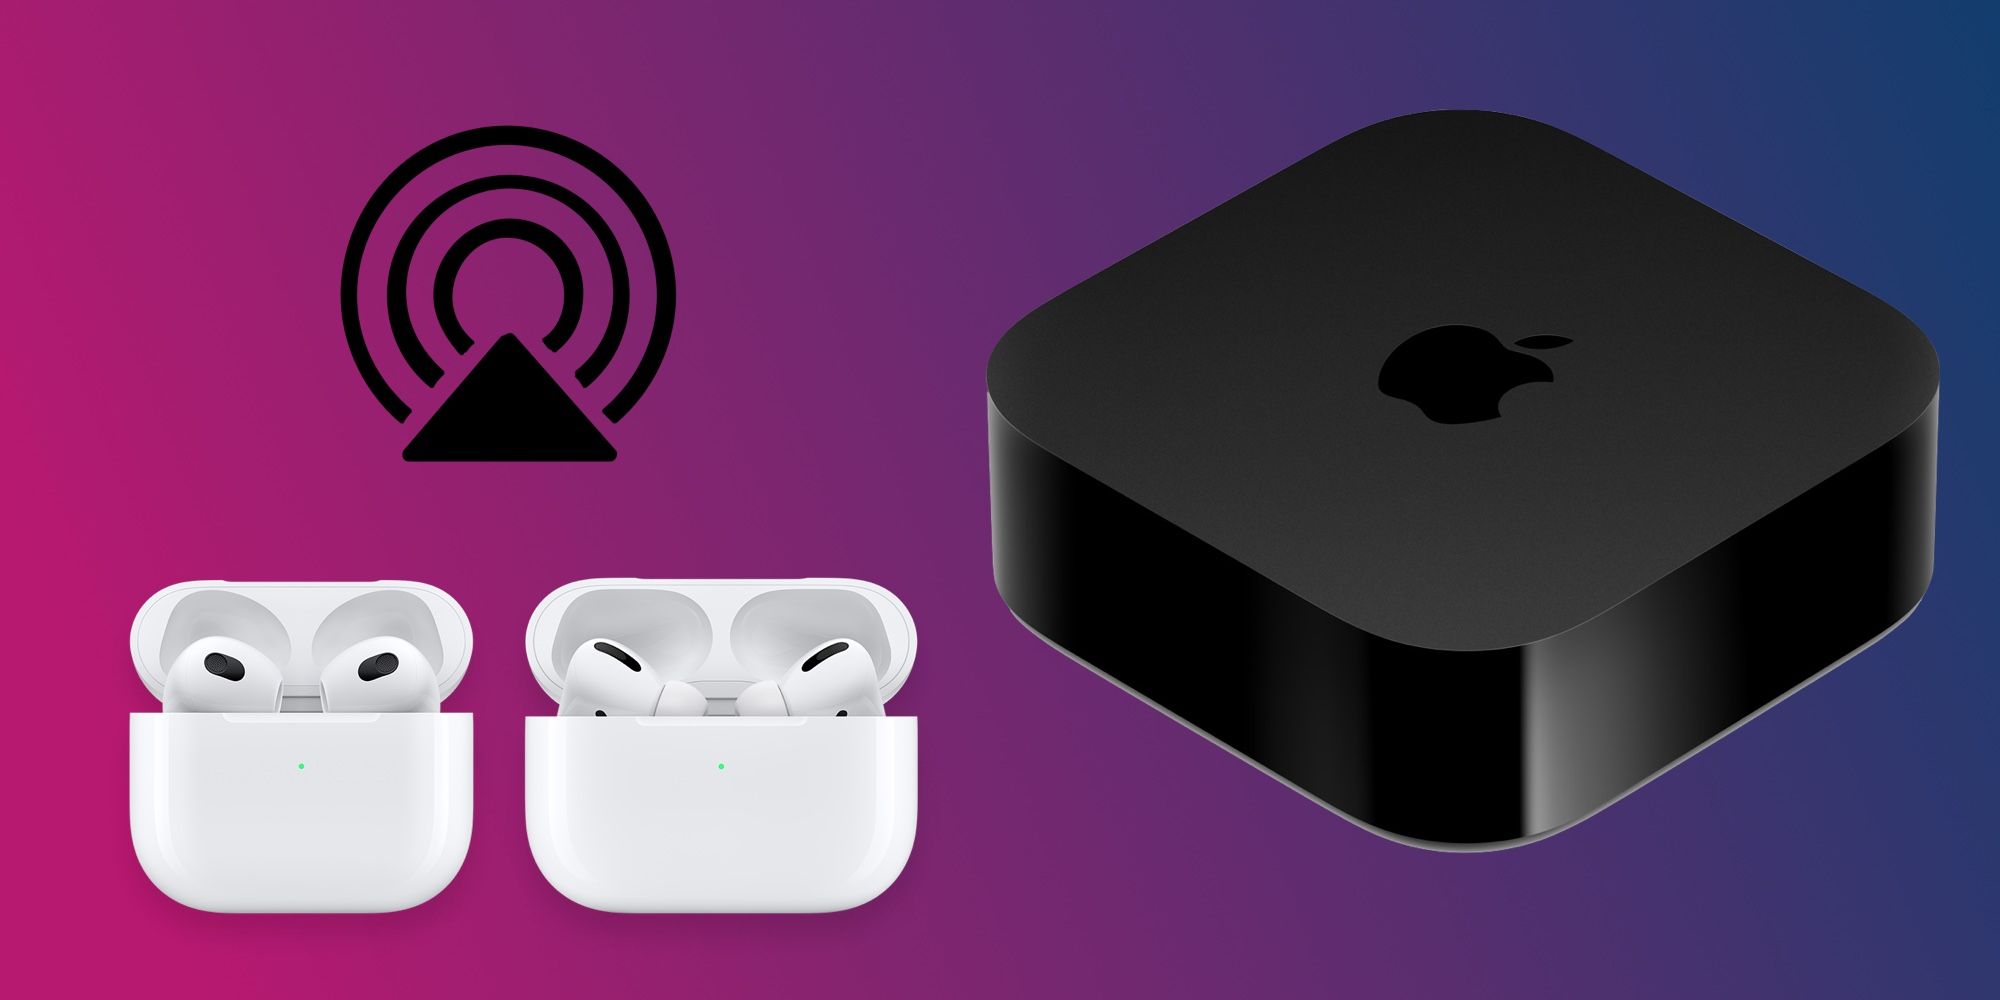 Sharing audio with AirPods on Apple TV